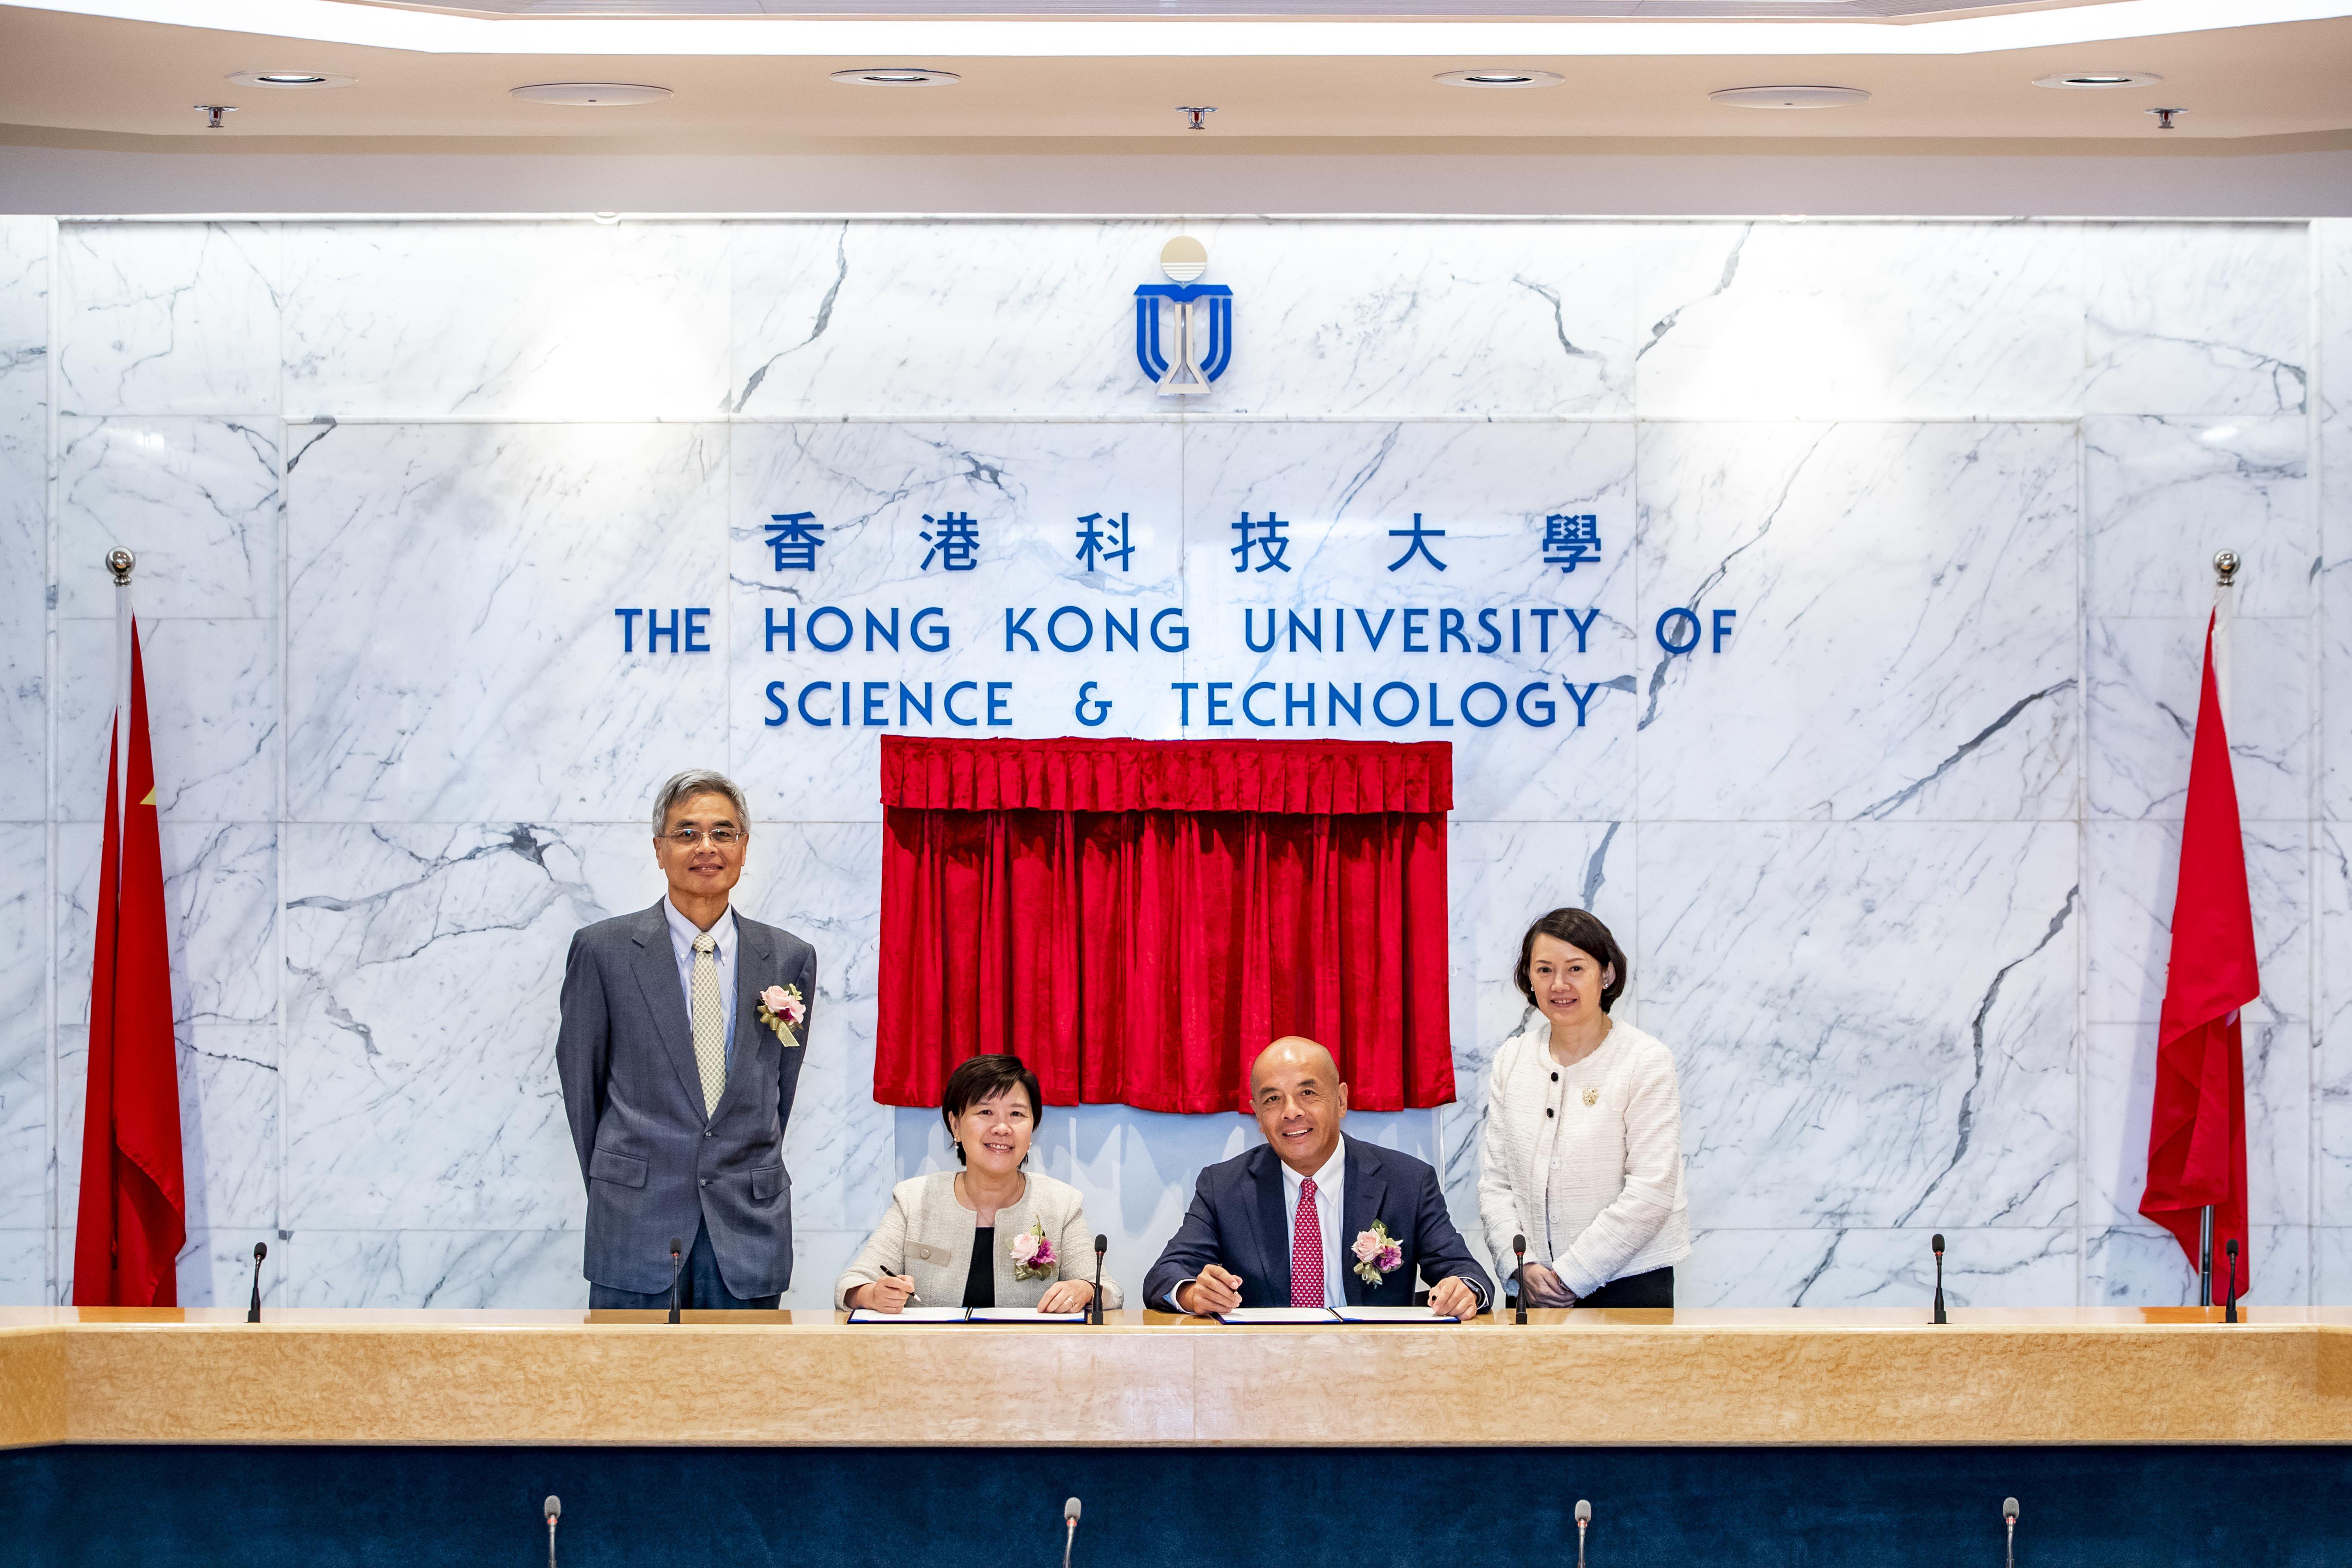 Prof Nancy Ip, Vice-President for Research and Graduate Studies, HKUST (2nd from the left), and Mr Herbert Cheng Jr., Chief Executive Officer of Chiaphua Industries Ltd (2nd from the right), signed the contract for HKUST-CIL Joint Laboratory of Innovative Environmental Health Technologies, with Prof Wei Shyy, Acting President, HKUST (1st from the left), and Mrs Sheilah Chatjaval, General Counsel of Chiaphua Industries Ltd (1st from the right), being the witnesses.